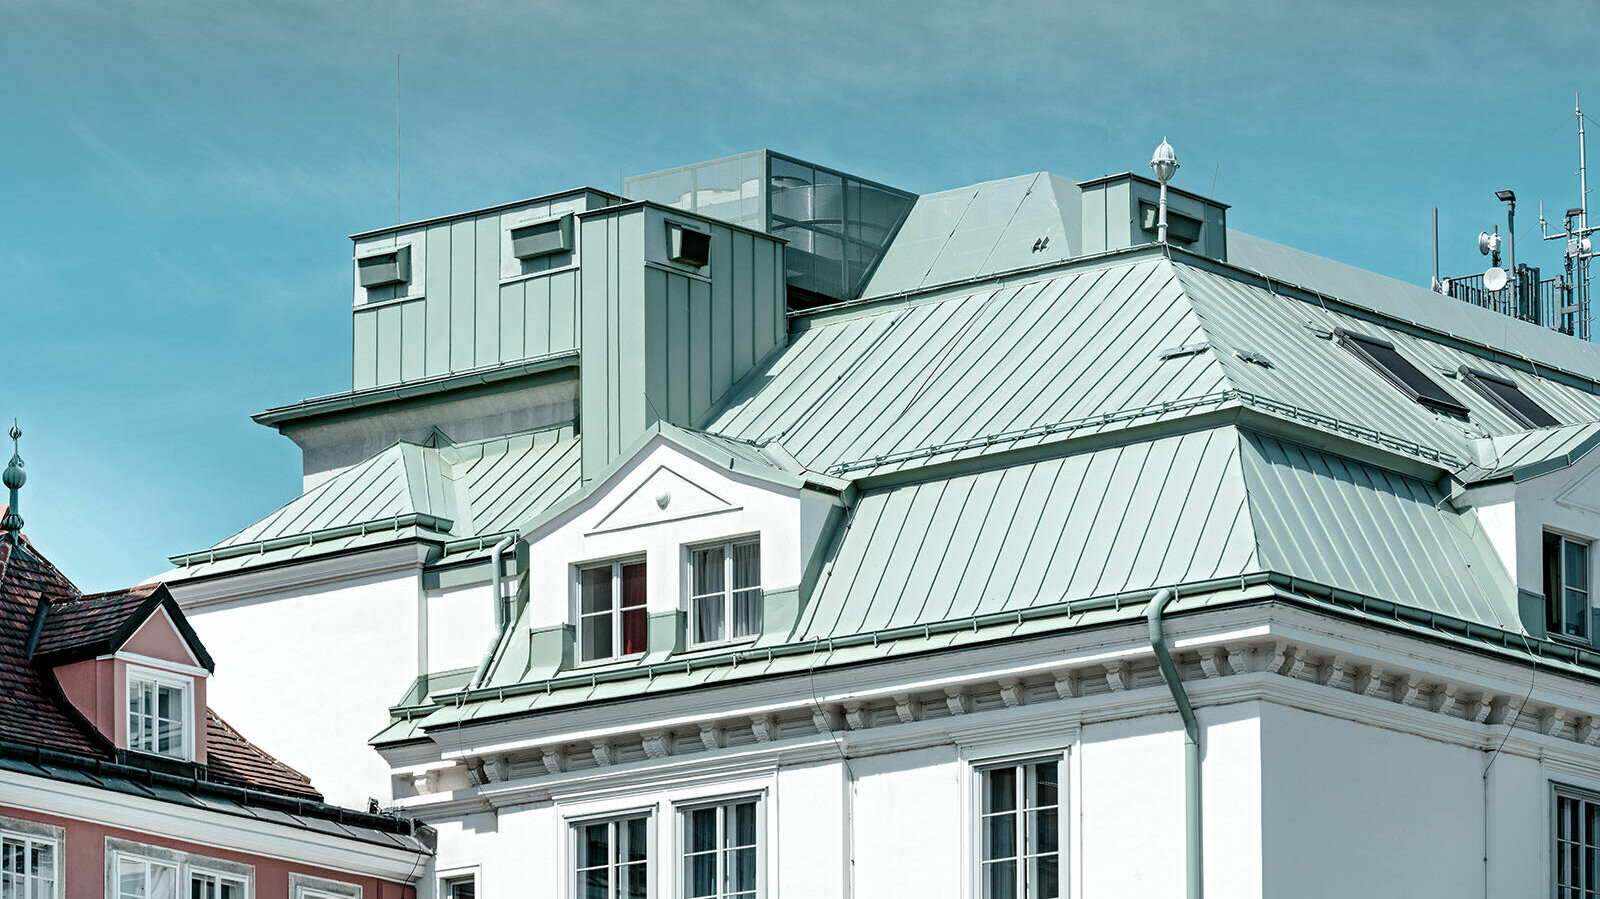 View of the central fire station am Hof in Vienna. The roof is clad with Prefalz in P.10 patina green.